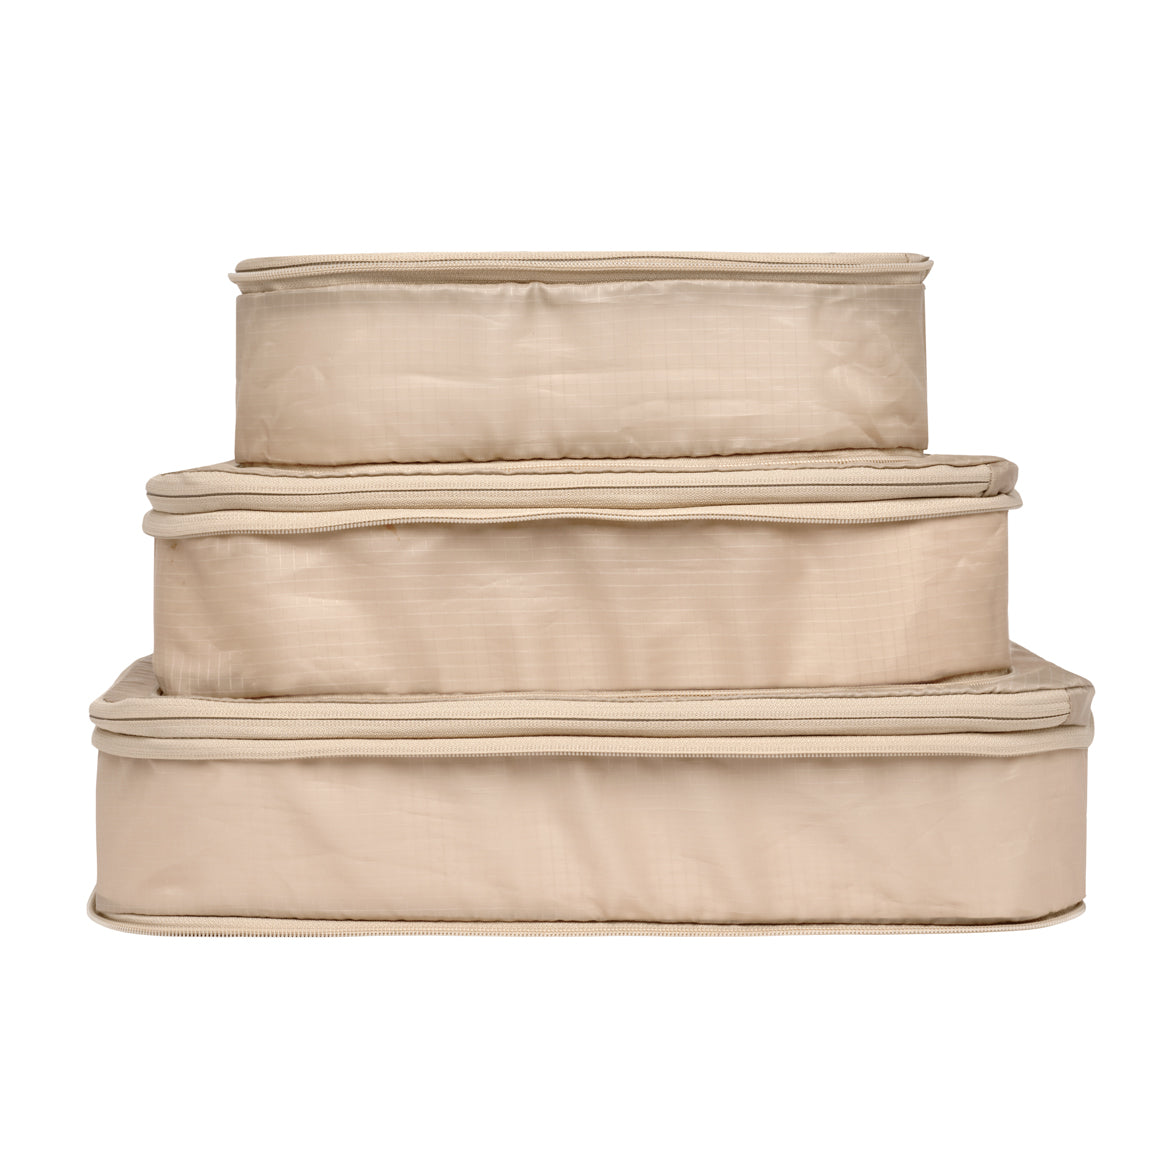 Bag-all Basic Compression Packing Cubes, 3-pack Taupe - Bag-all